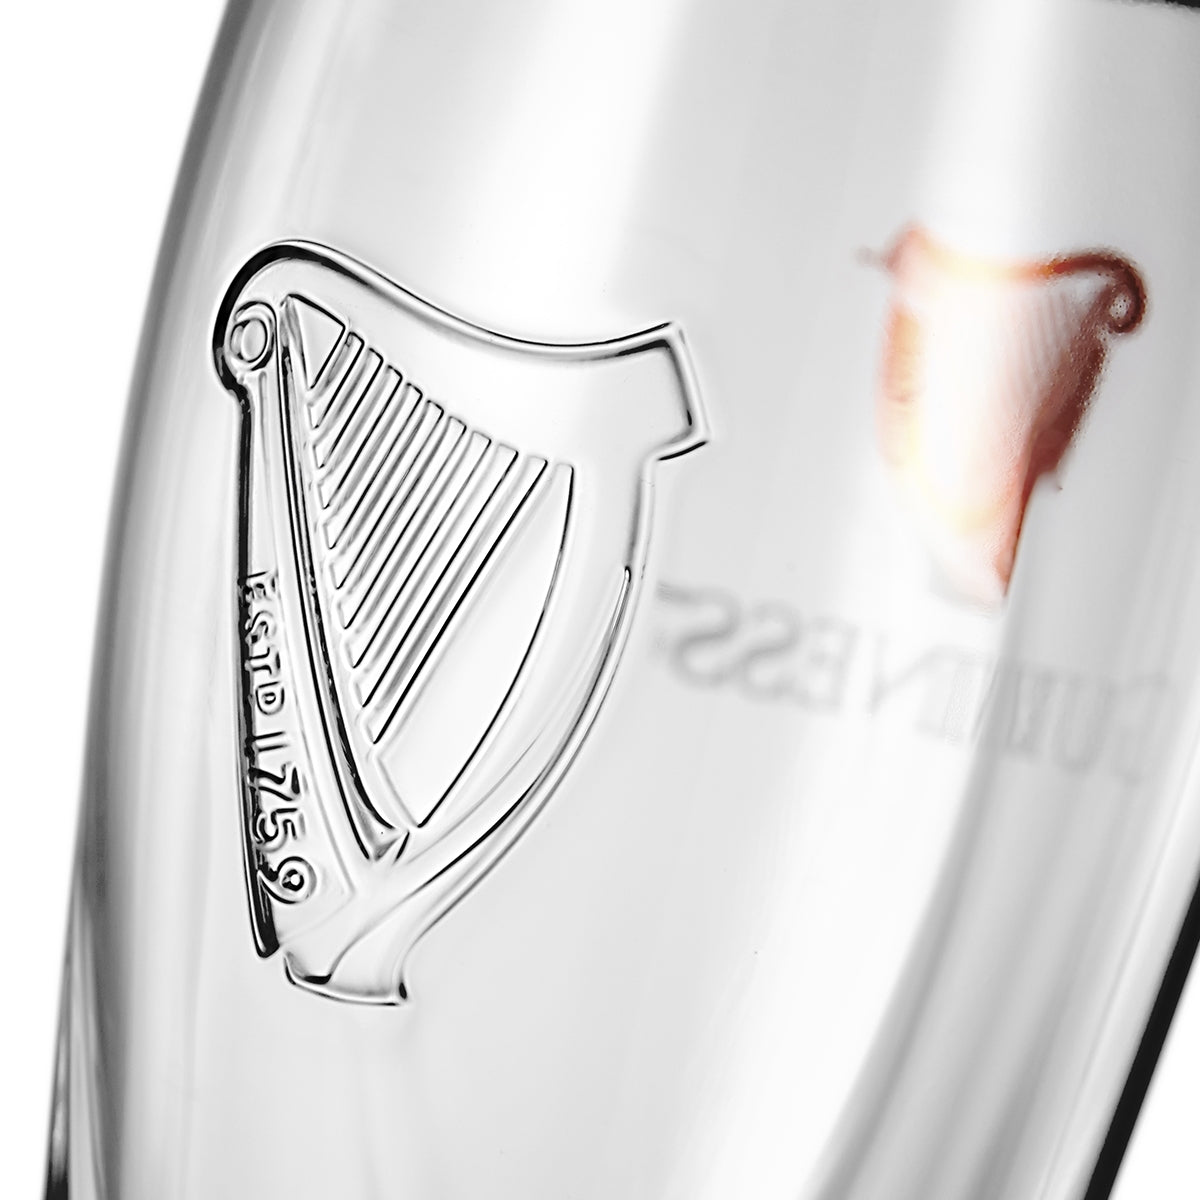 Guinness Two Half Pint Glass Pack with Embossed Harp Design on Back, Free  US Shipping